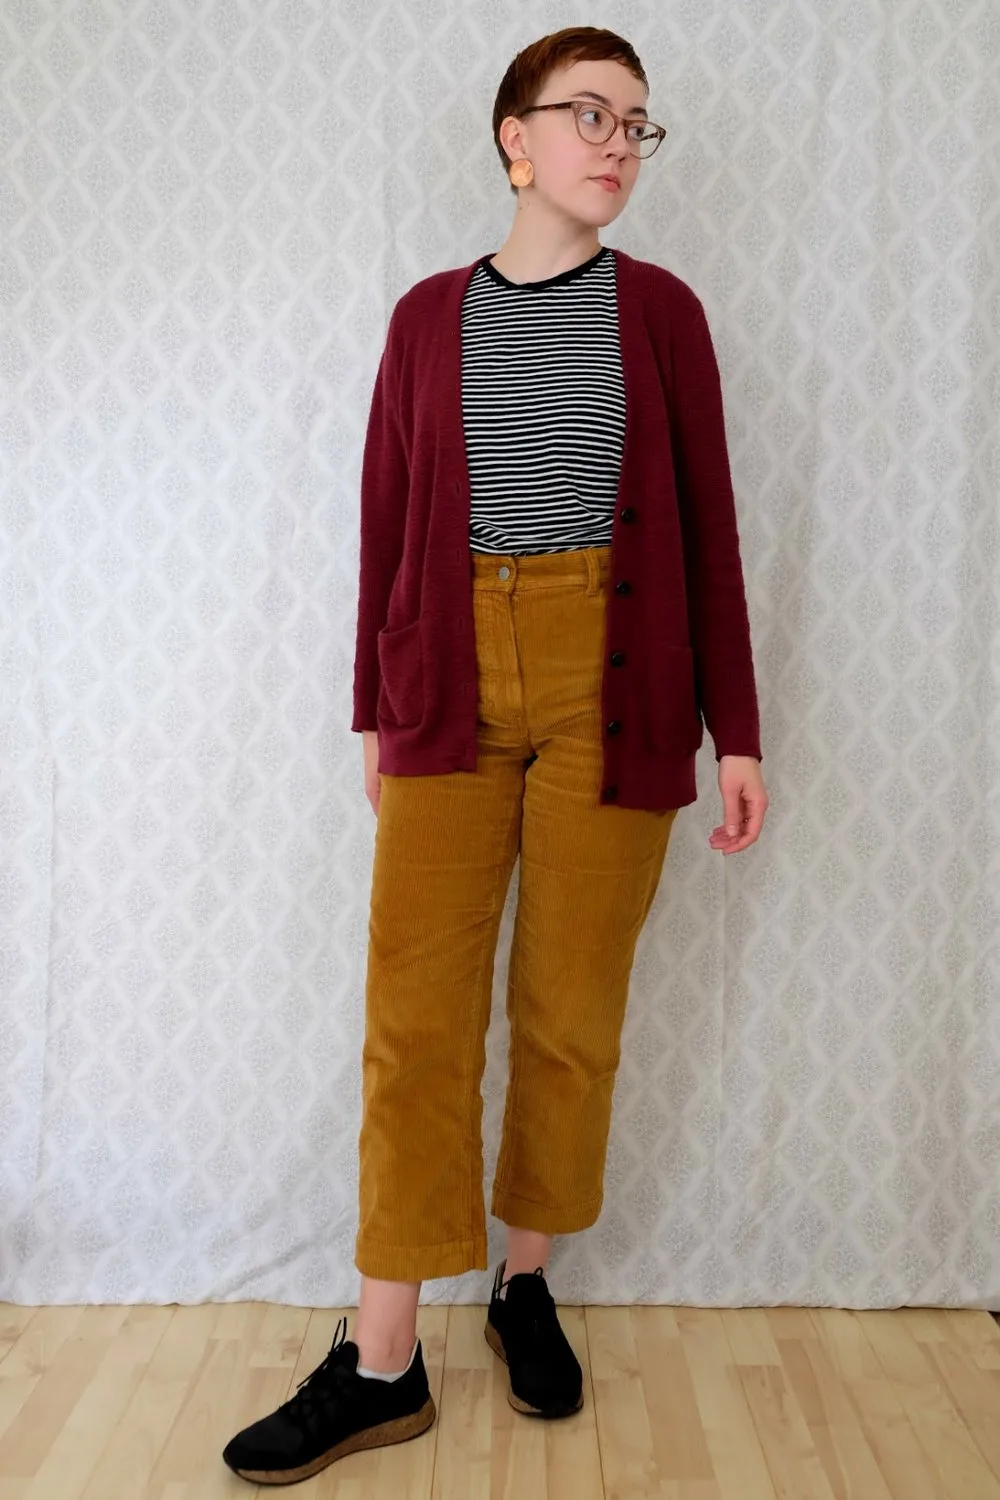 everlane corduroy straight jean in golden brown styling and review stylewise-blog.com